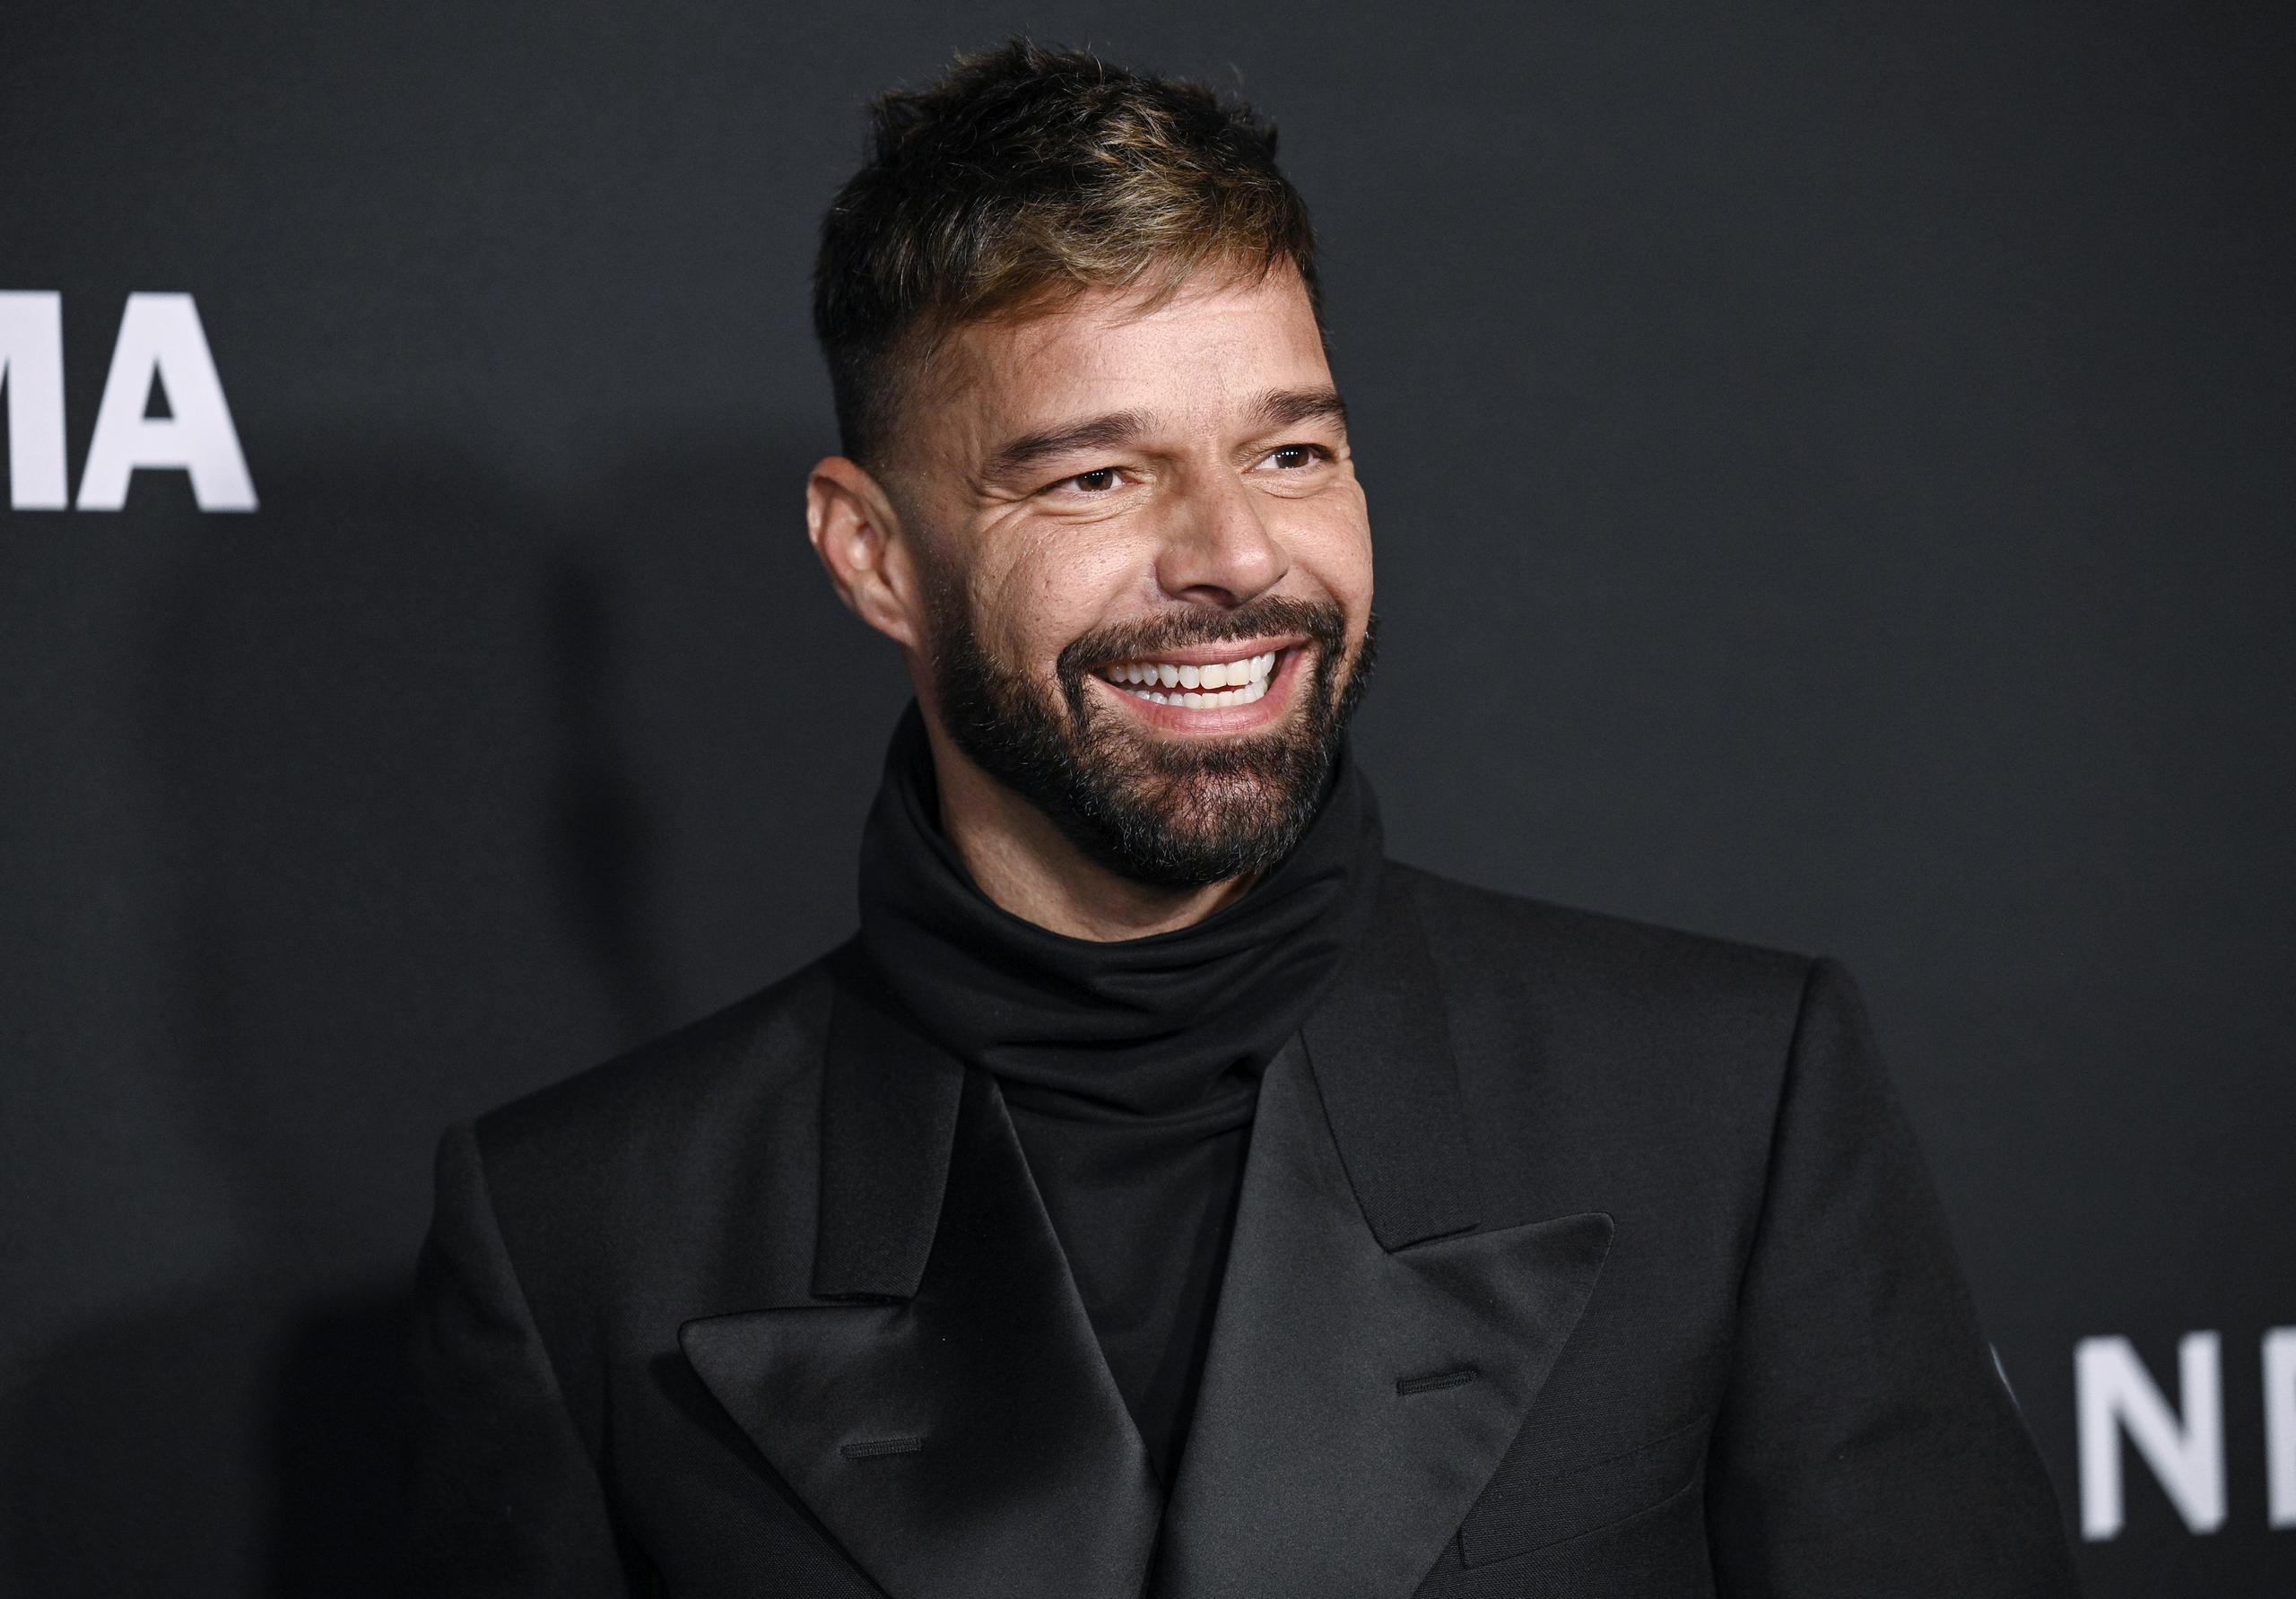 Ricky Martin attends the MoMA Film Benefit presented by CHANEL honoring Penelope Cruz at the Museum of Modern Art on Tuesday, Dec. 14, 2021, in New York. (Photo by Evan Agostini/Invision/AP)